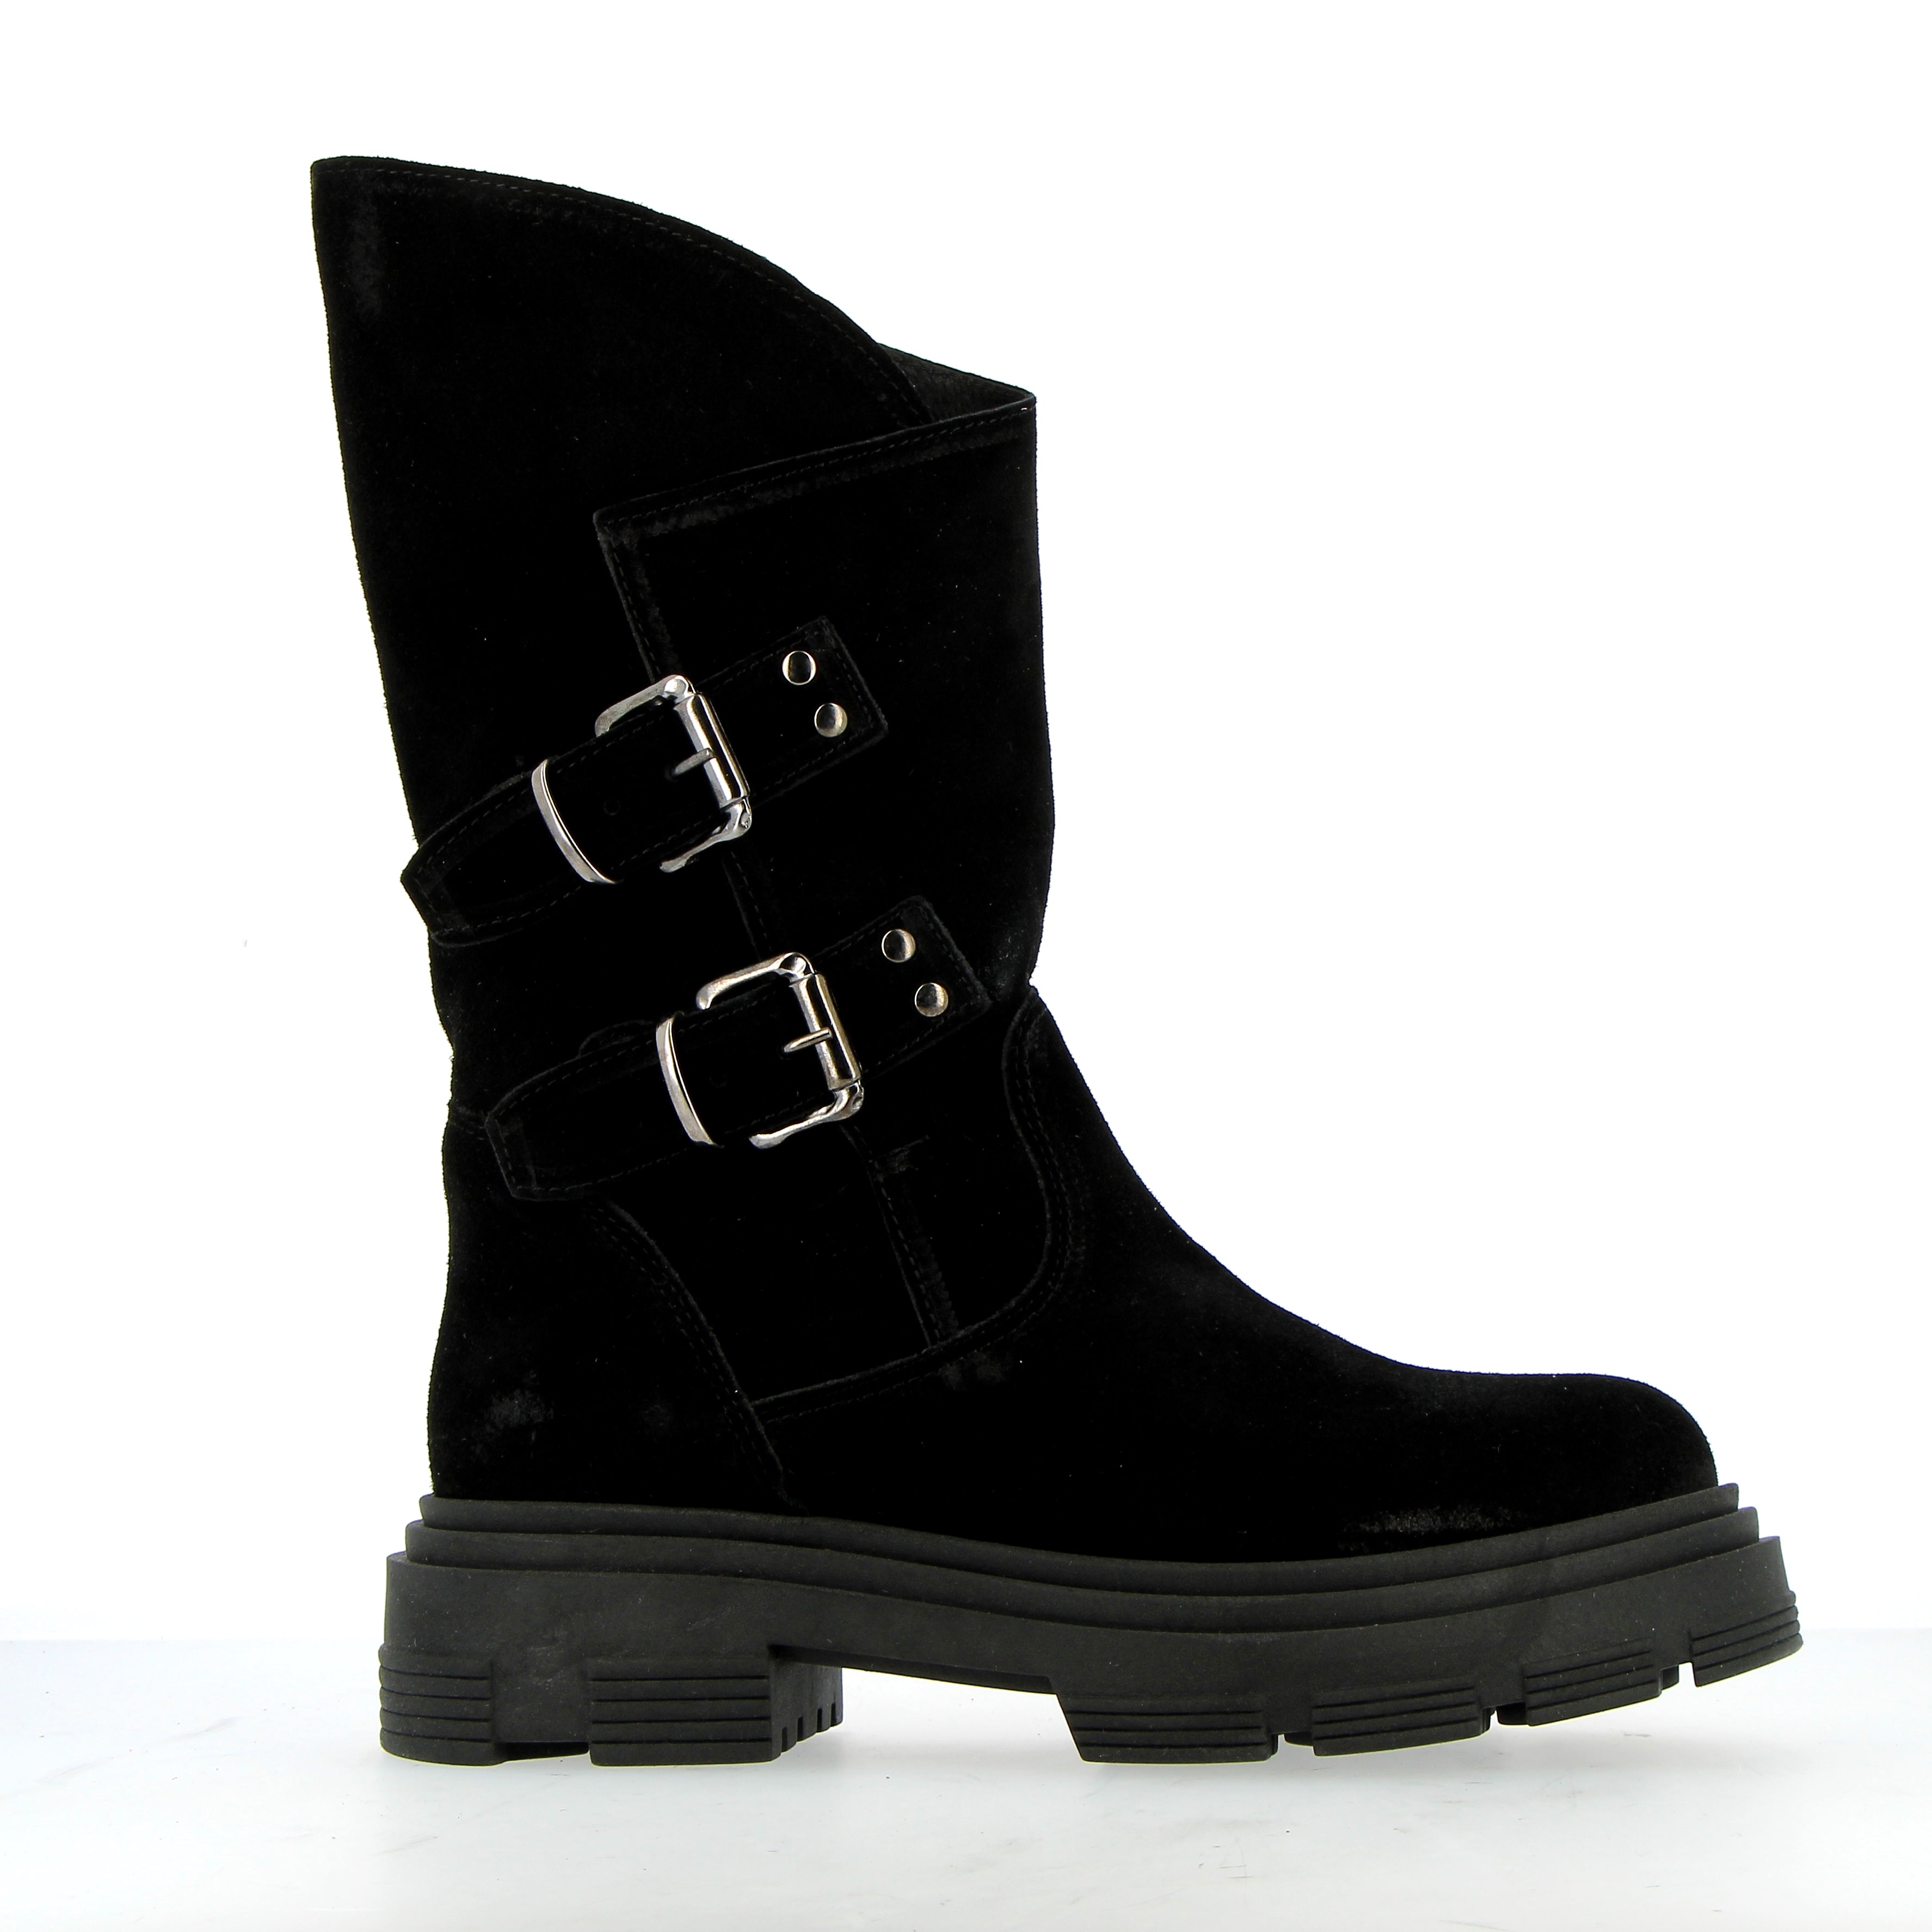 Black suede middle boot with buckles